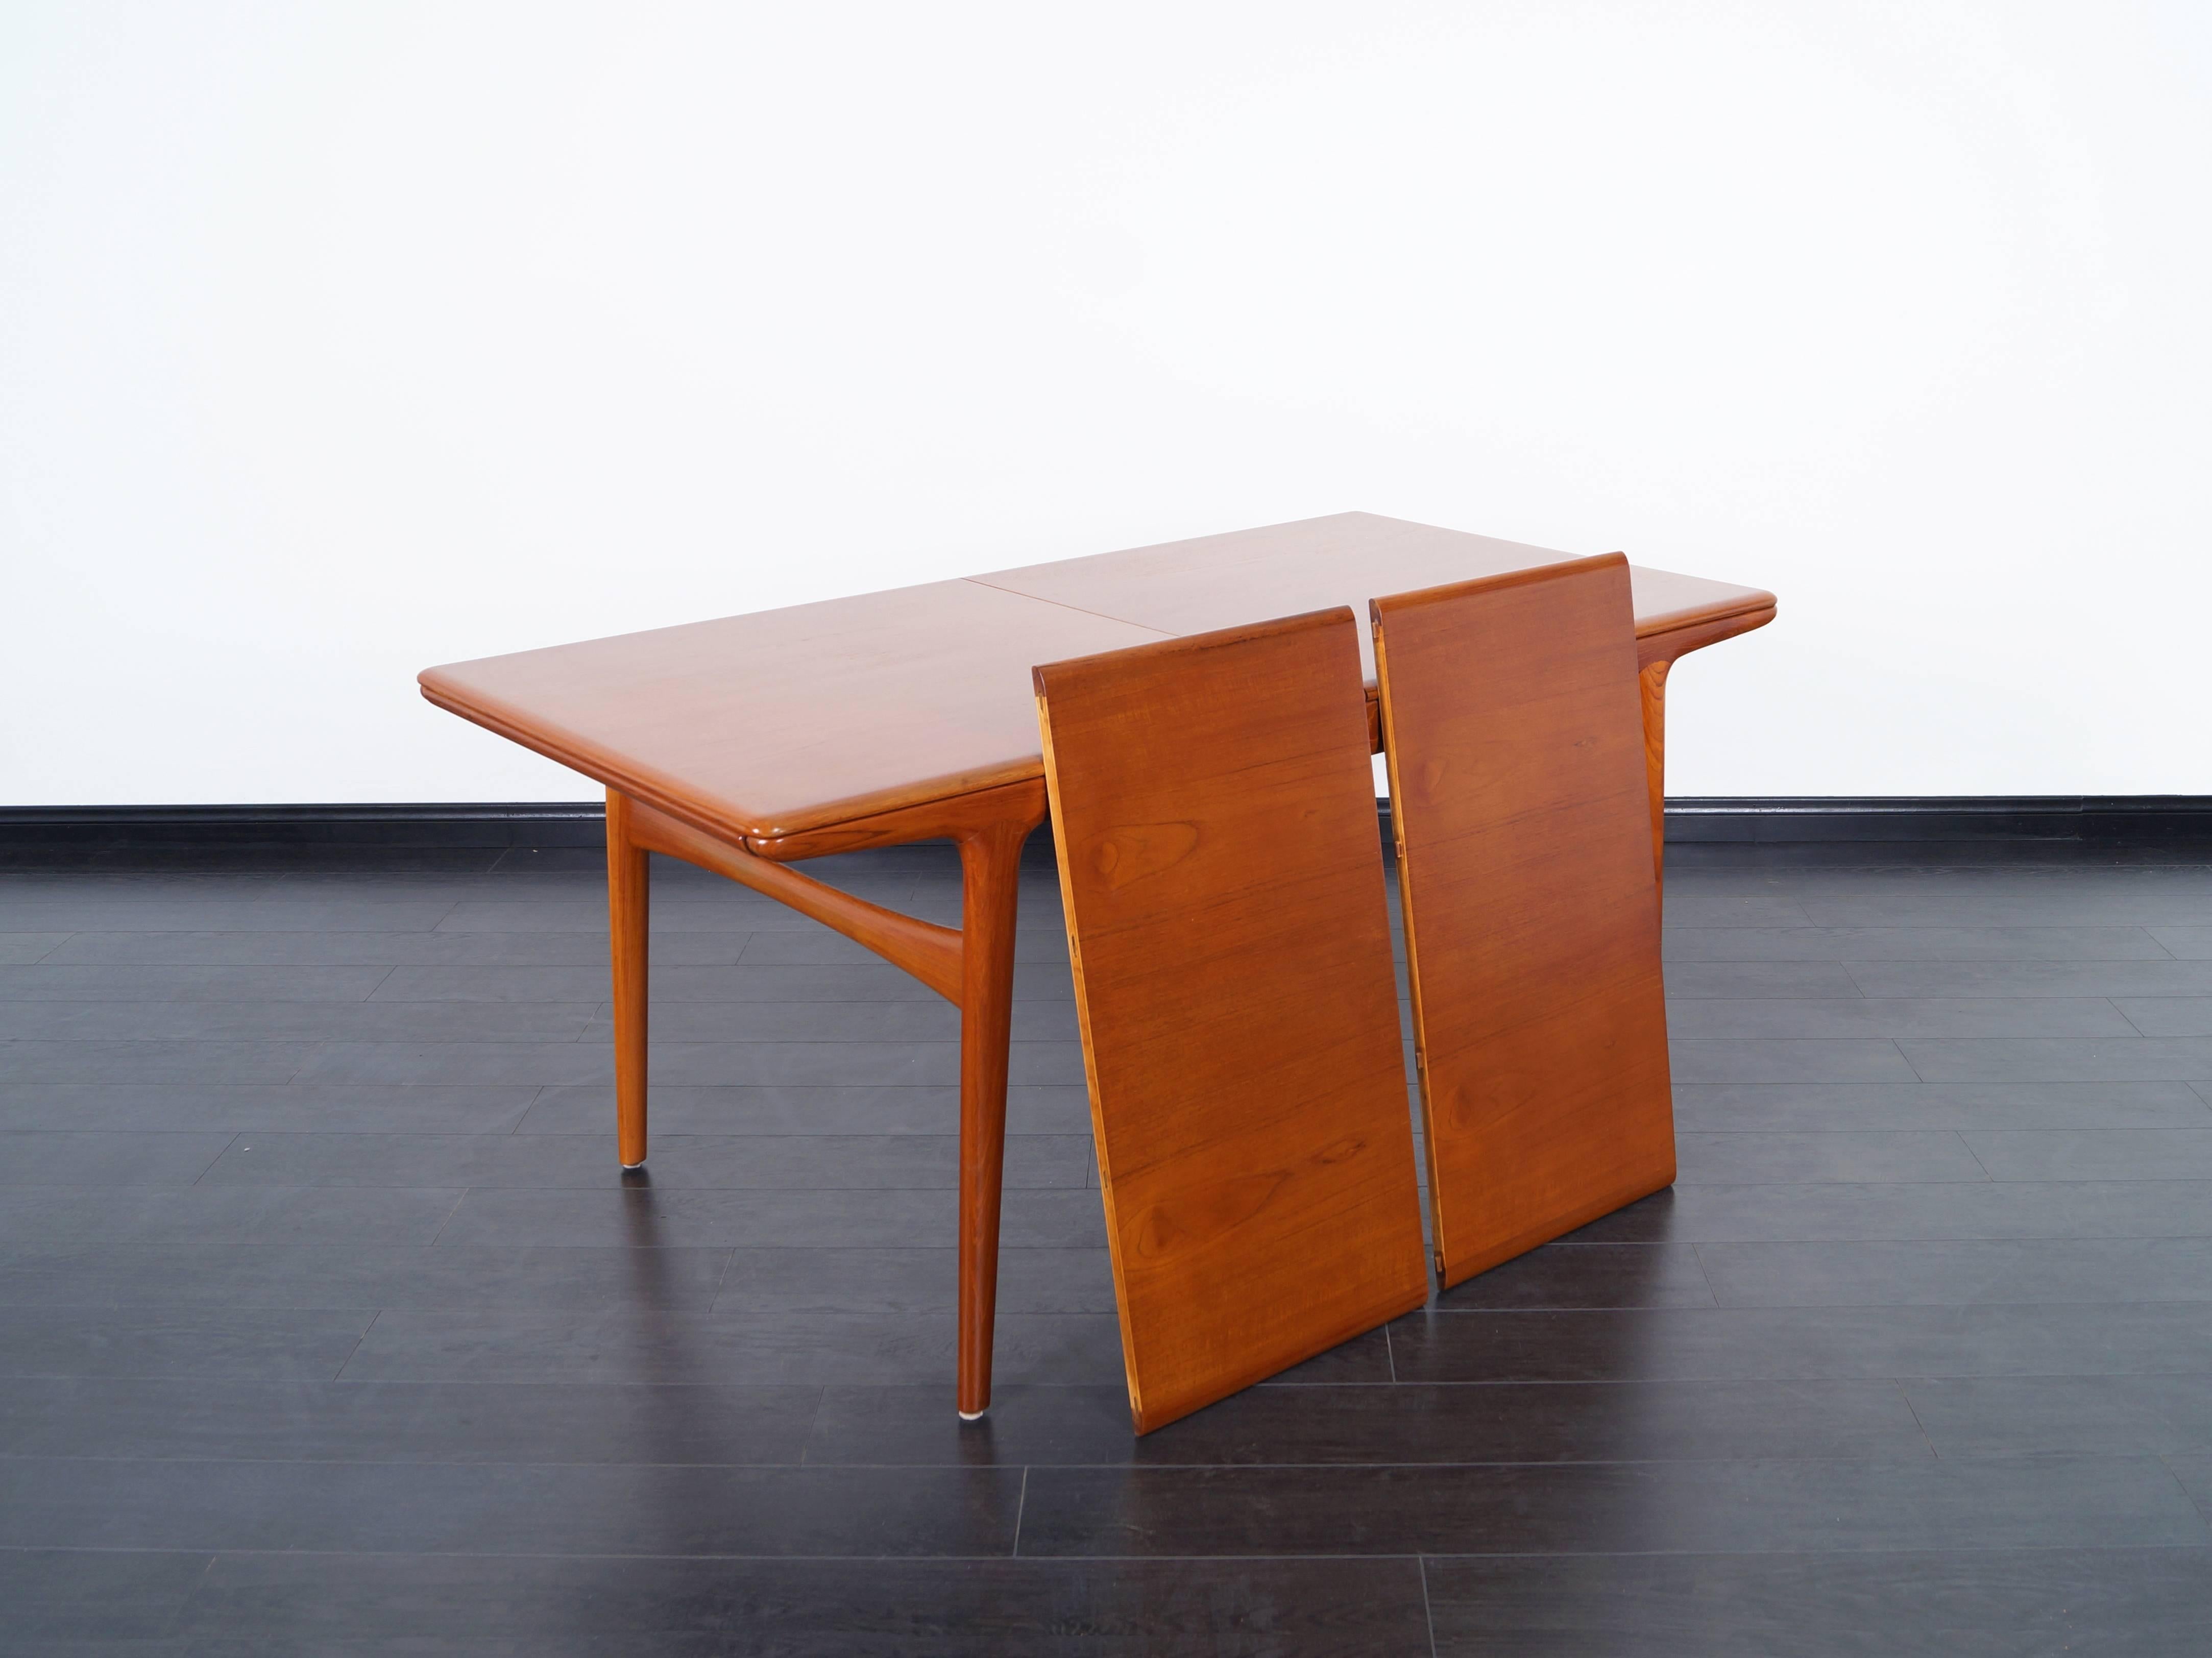 Danish modern teak dining table designed by Arne Hovmand-Olsen. Can be expand up to 97.5